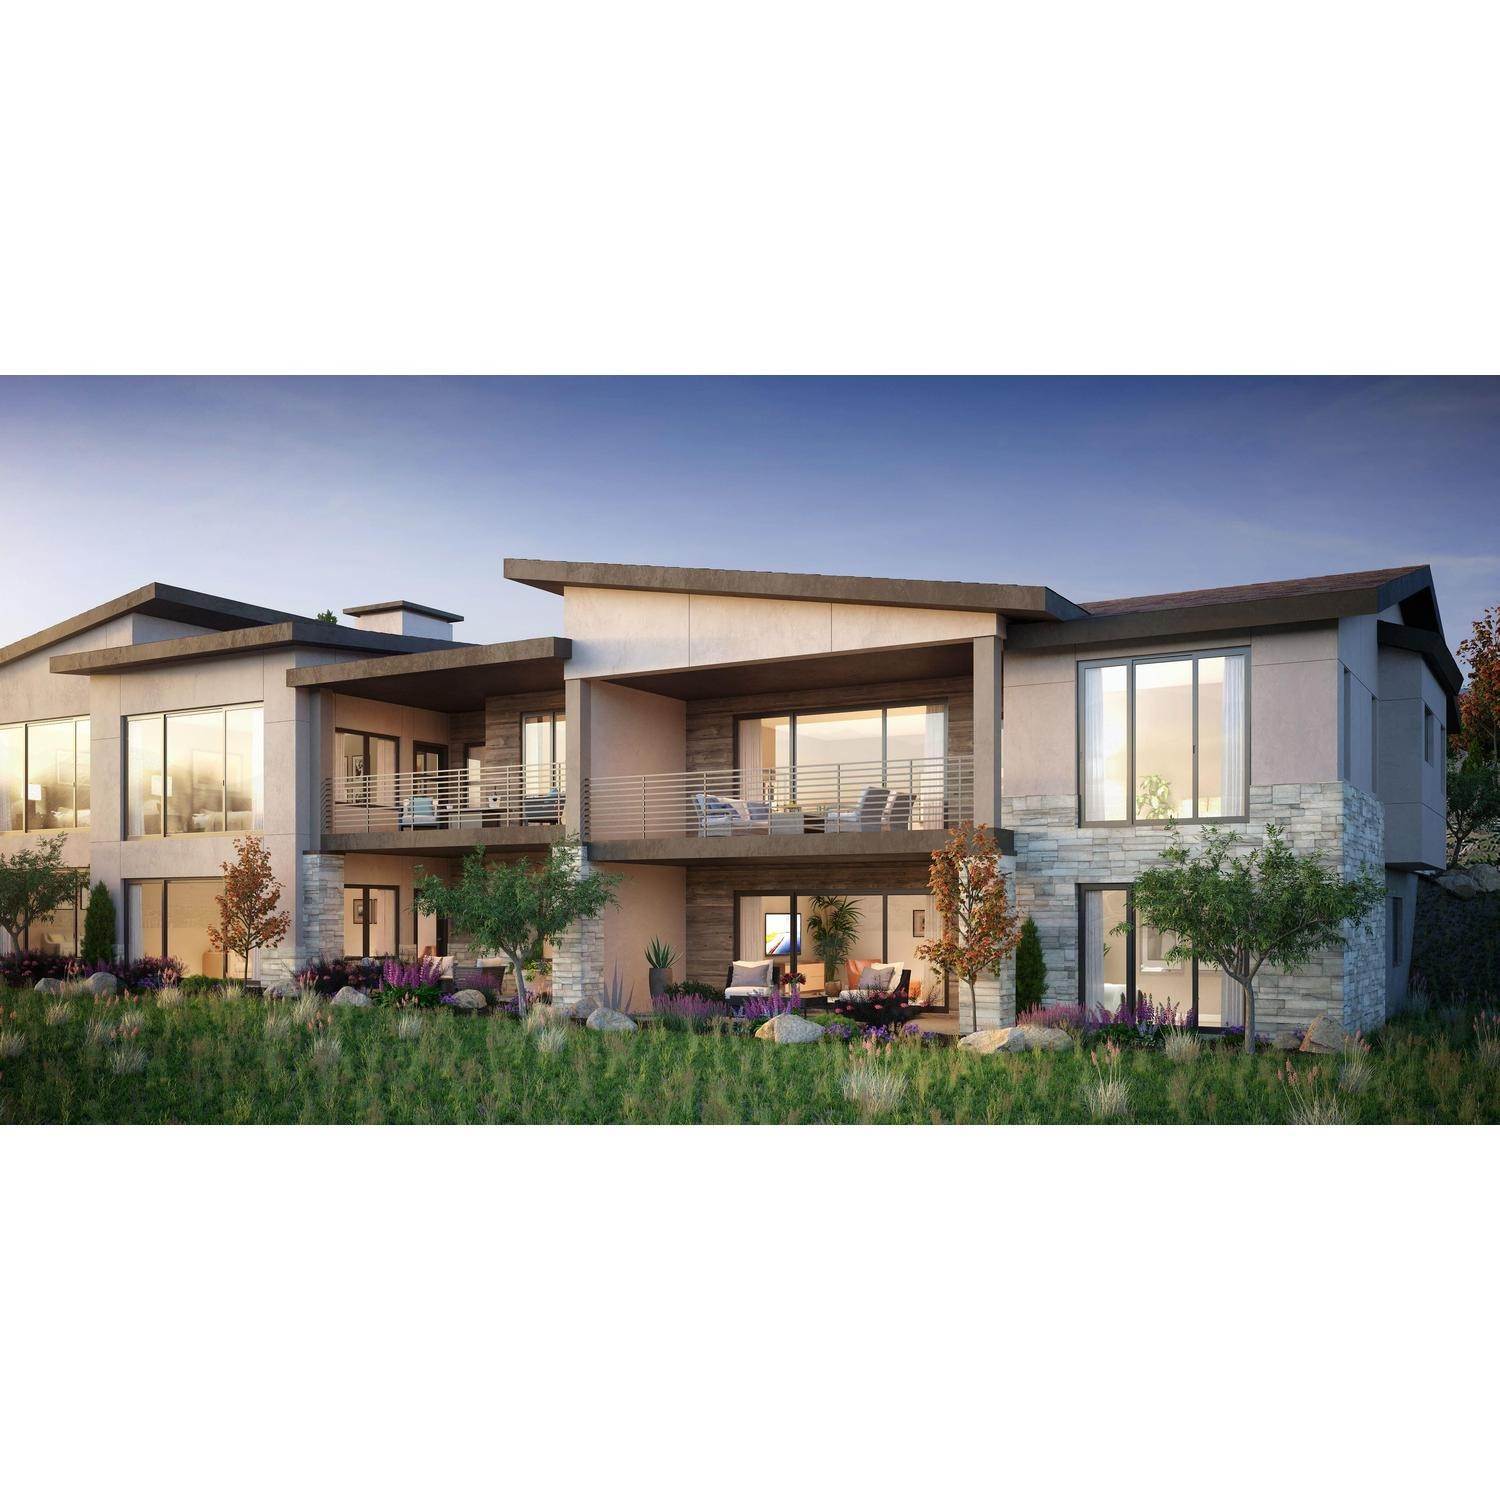 16. Shoreline Townhomes Gebäude bei 11449 N. Perspective Drive, Hideout Canyon, UT 84036